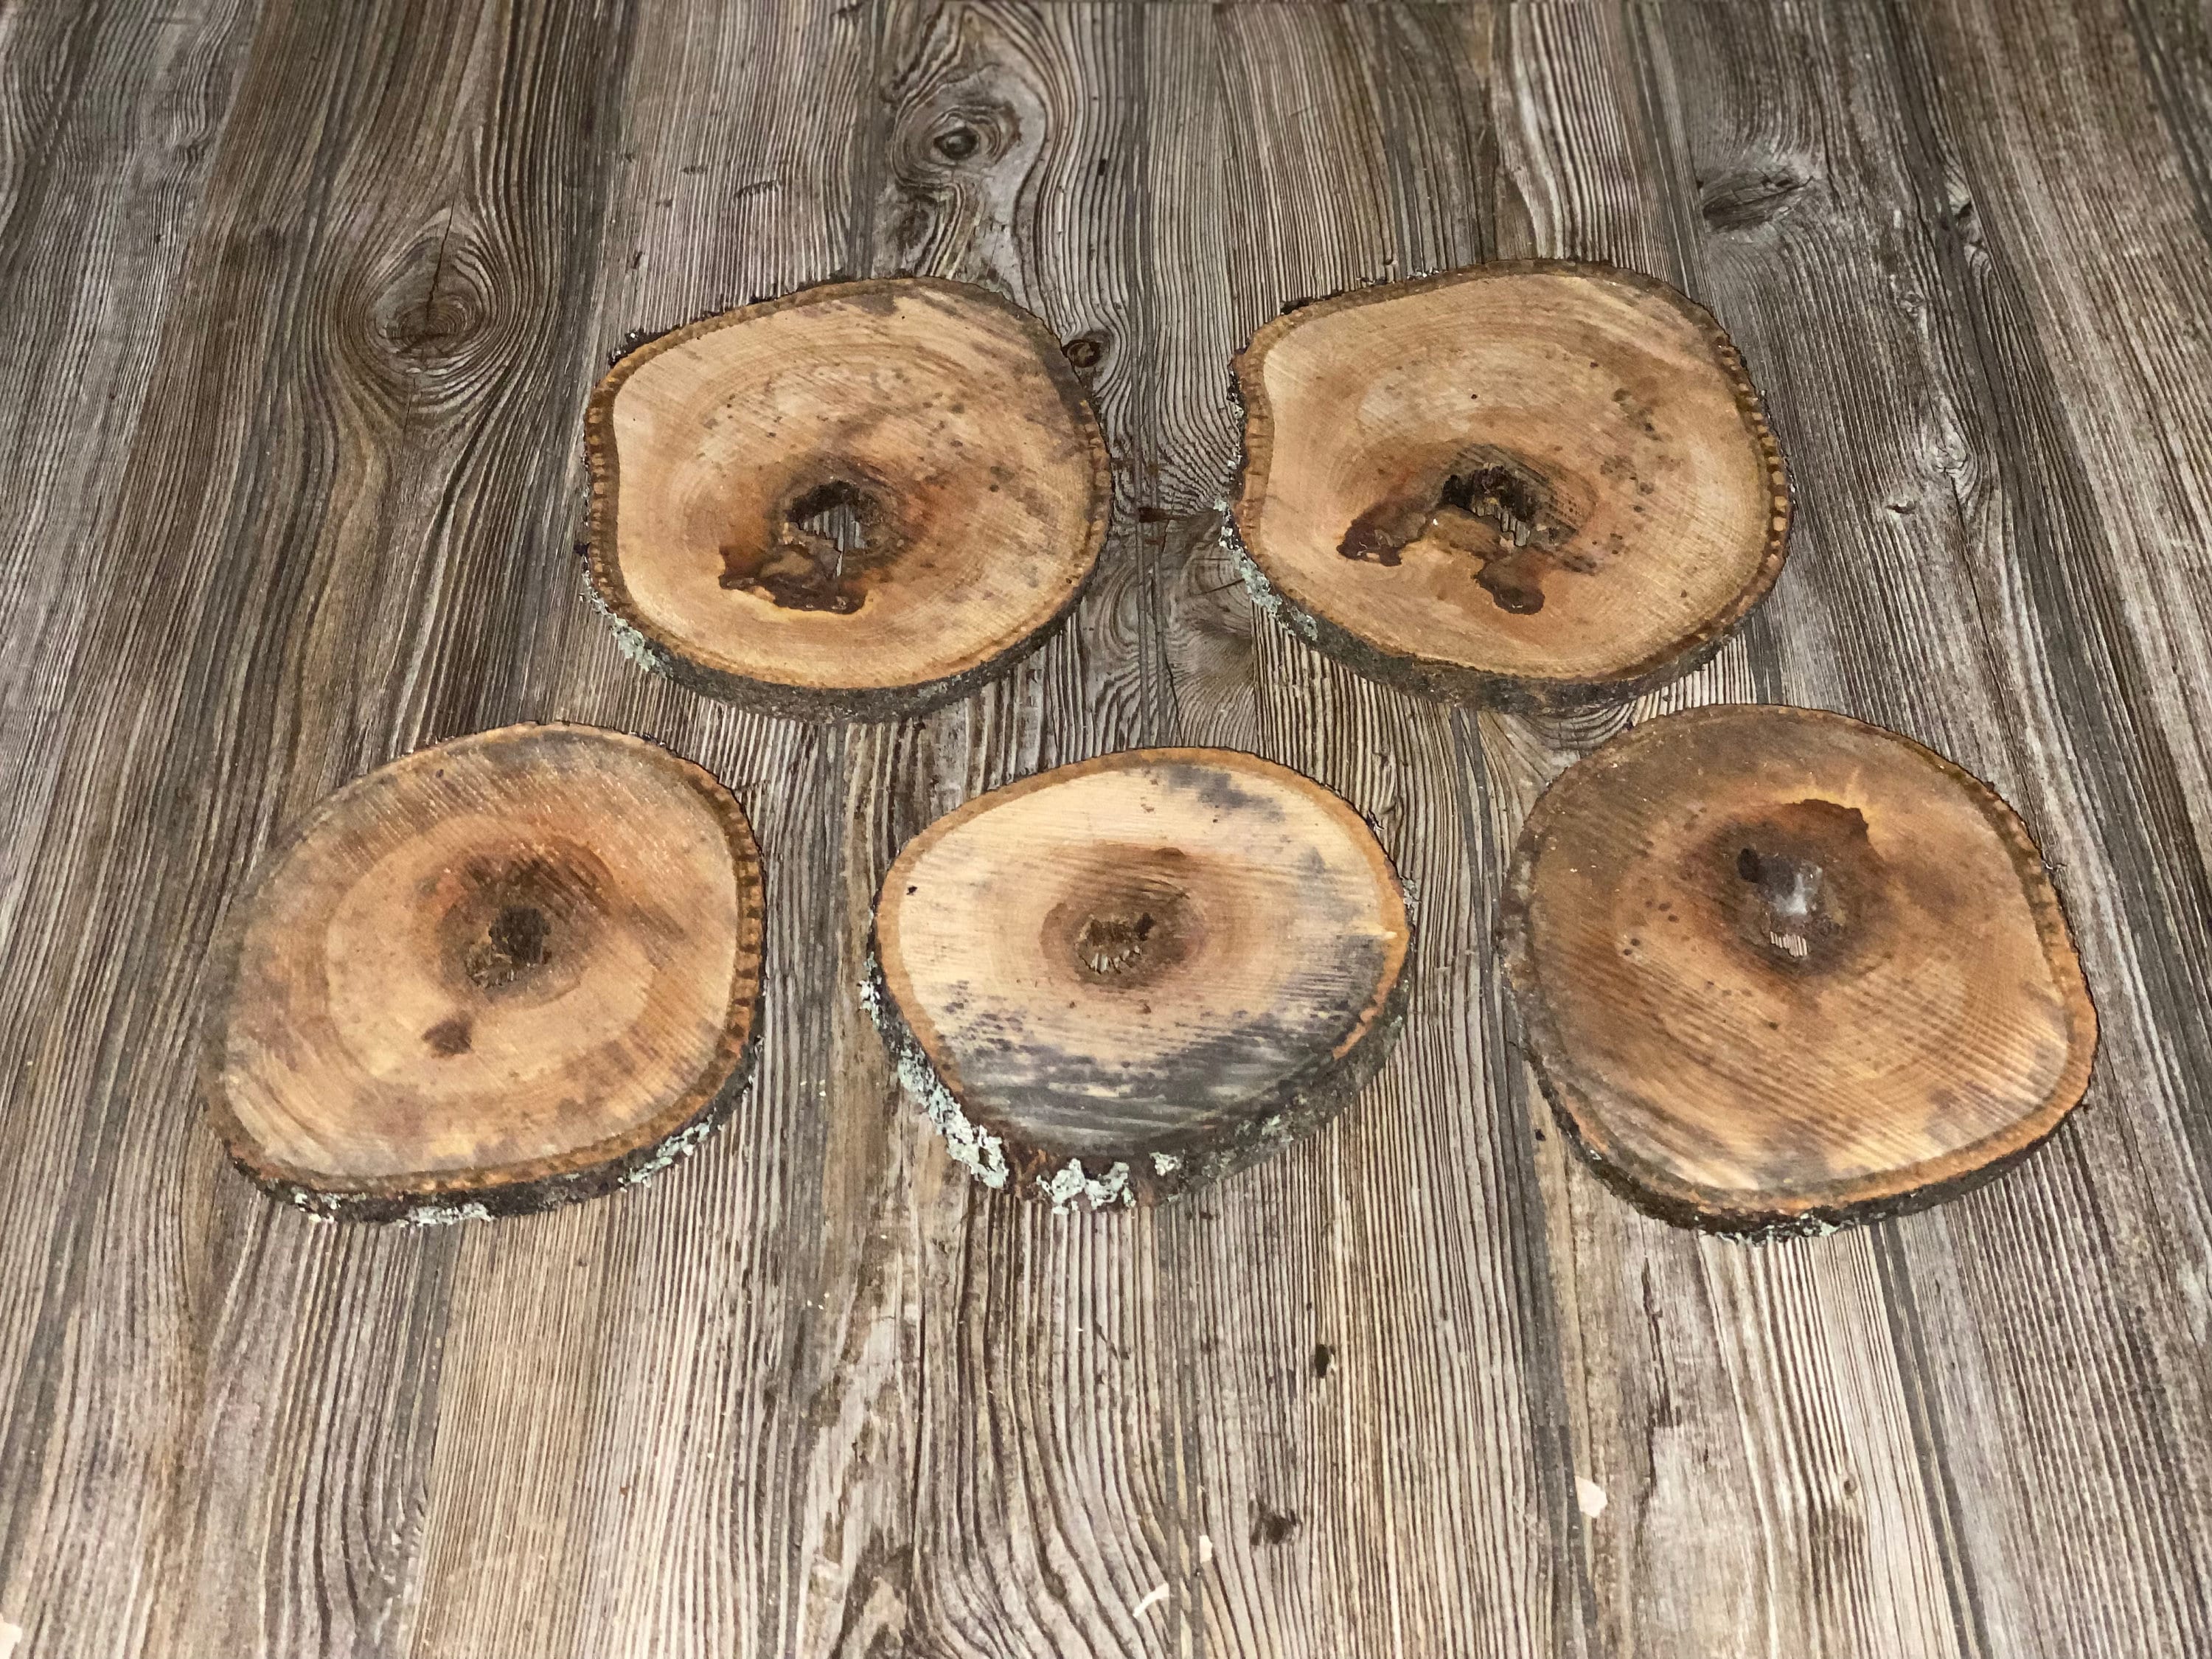 Five Donut Shaped Hickory Burl Slices, Approximately 6.5-8.5 Inches Long by 6-7.5 Inches Wide and 3/4 Inch Thick